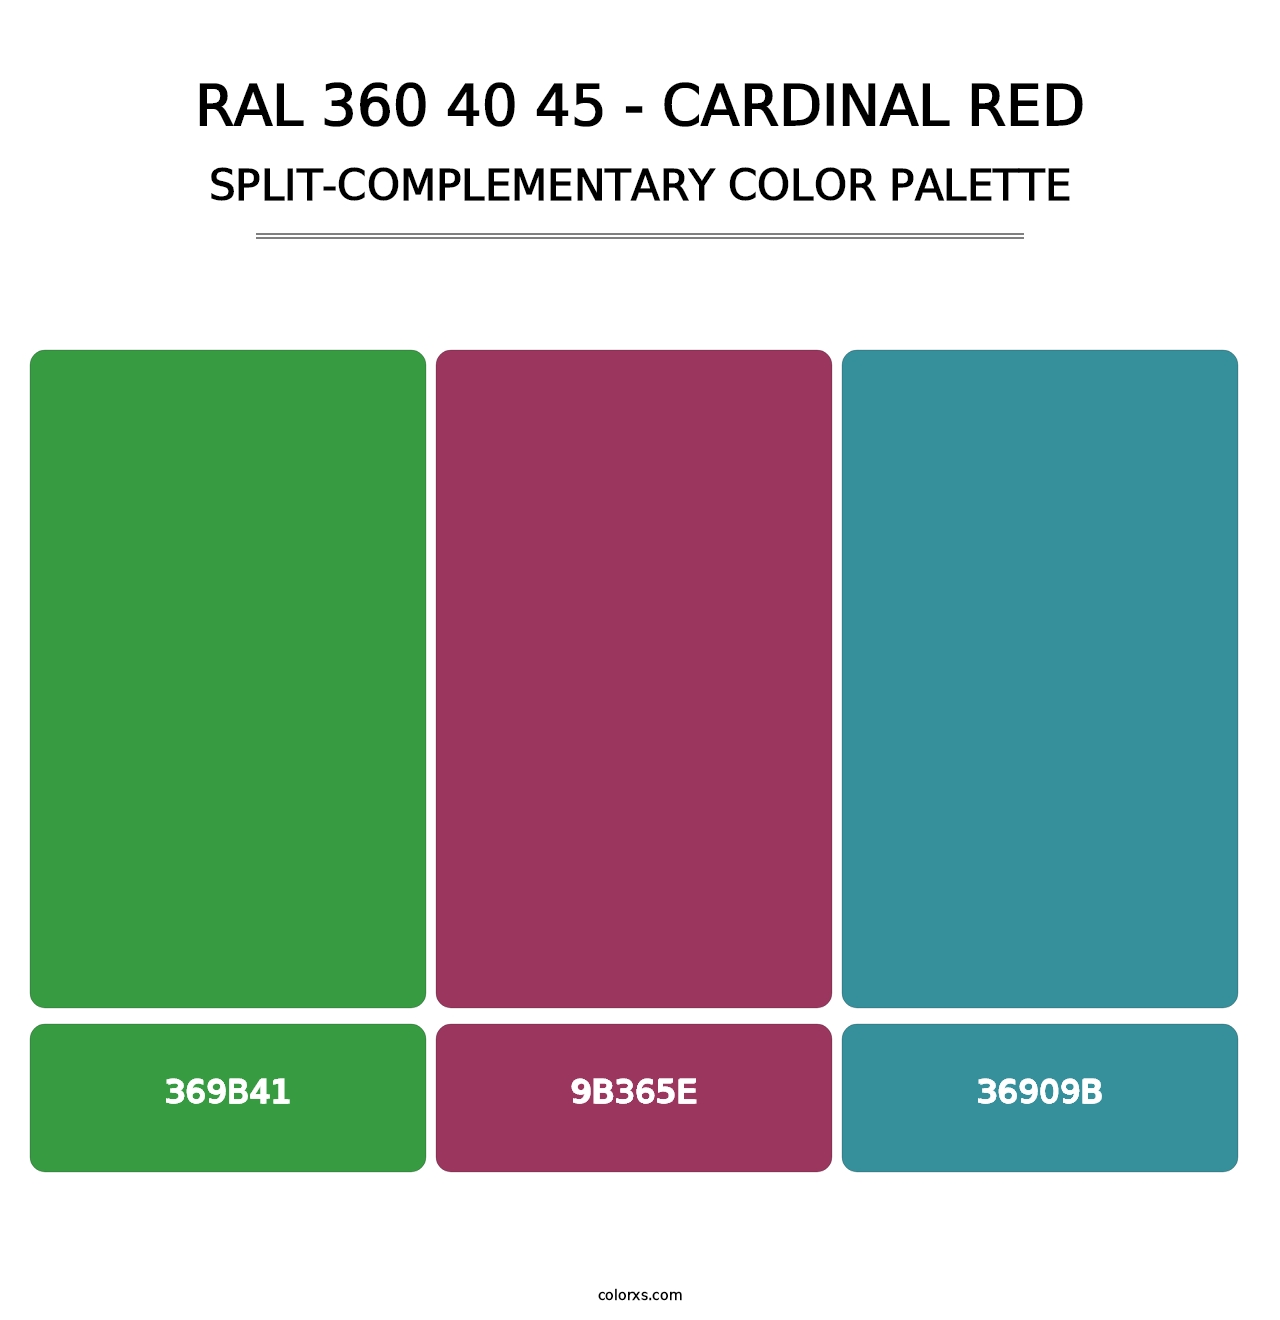 RAL 360 40 45 - Cardinal Red - Split-Complementary Color Palette